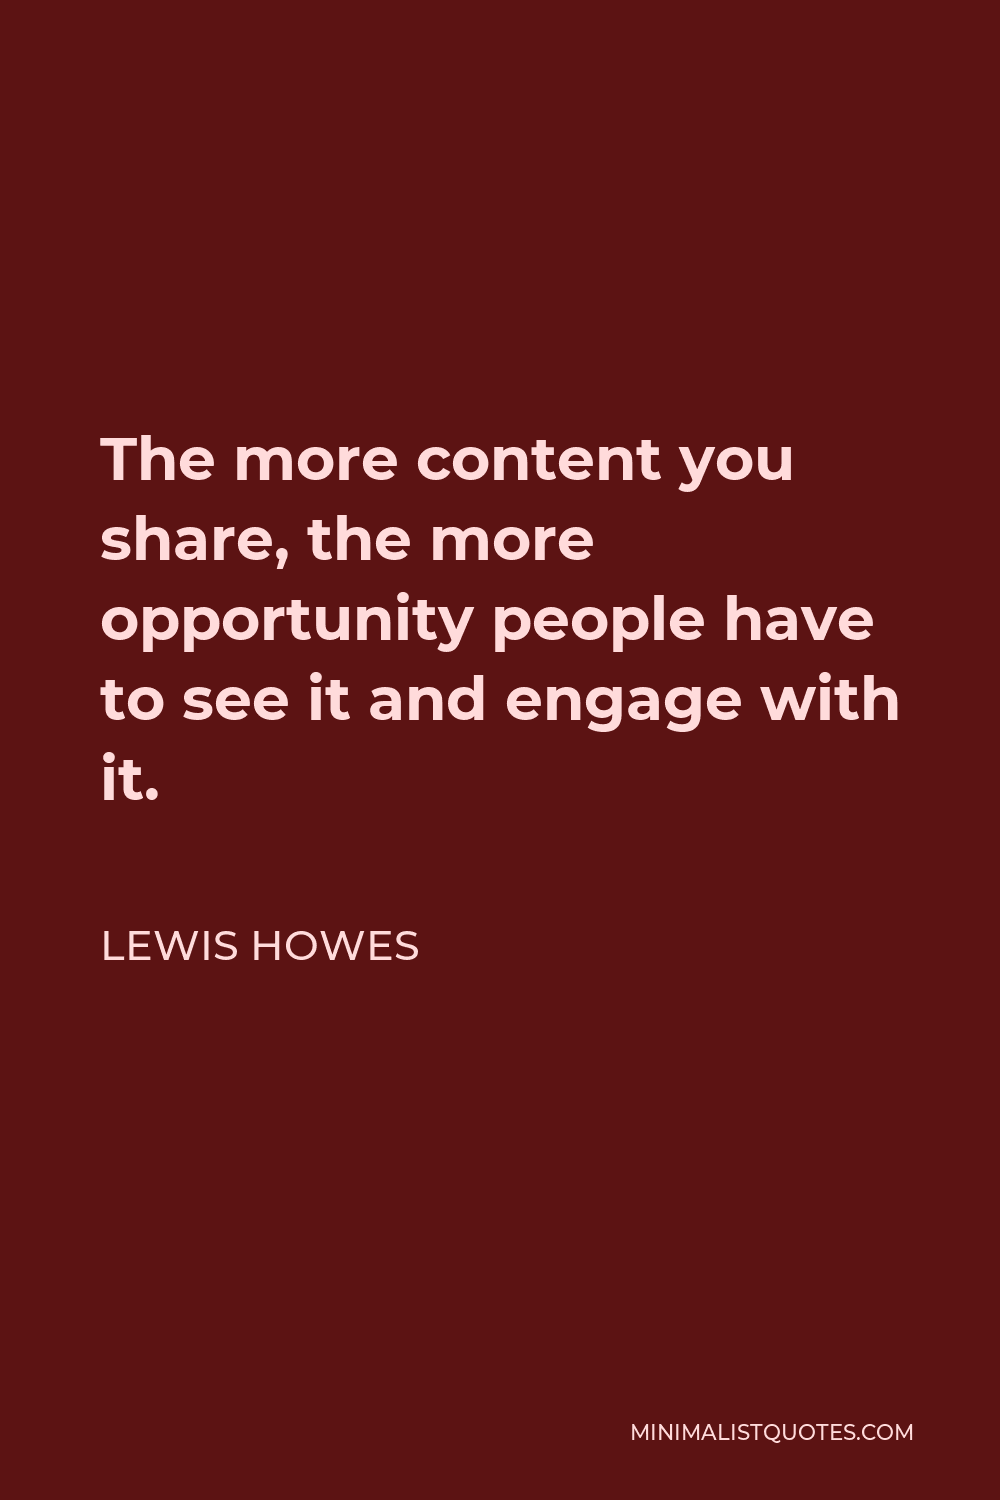 Lewis Howes Quote - The more content you share, the more opportunity people have to see it and engage with it.